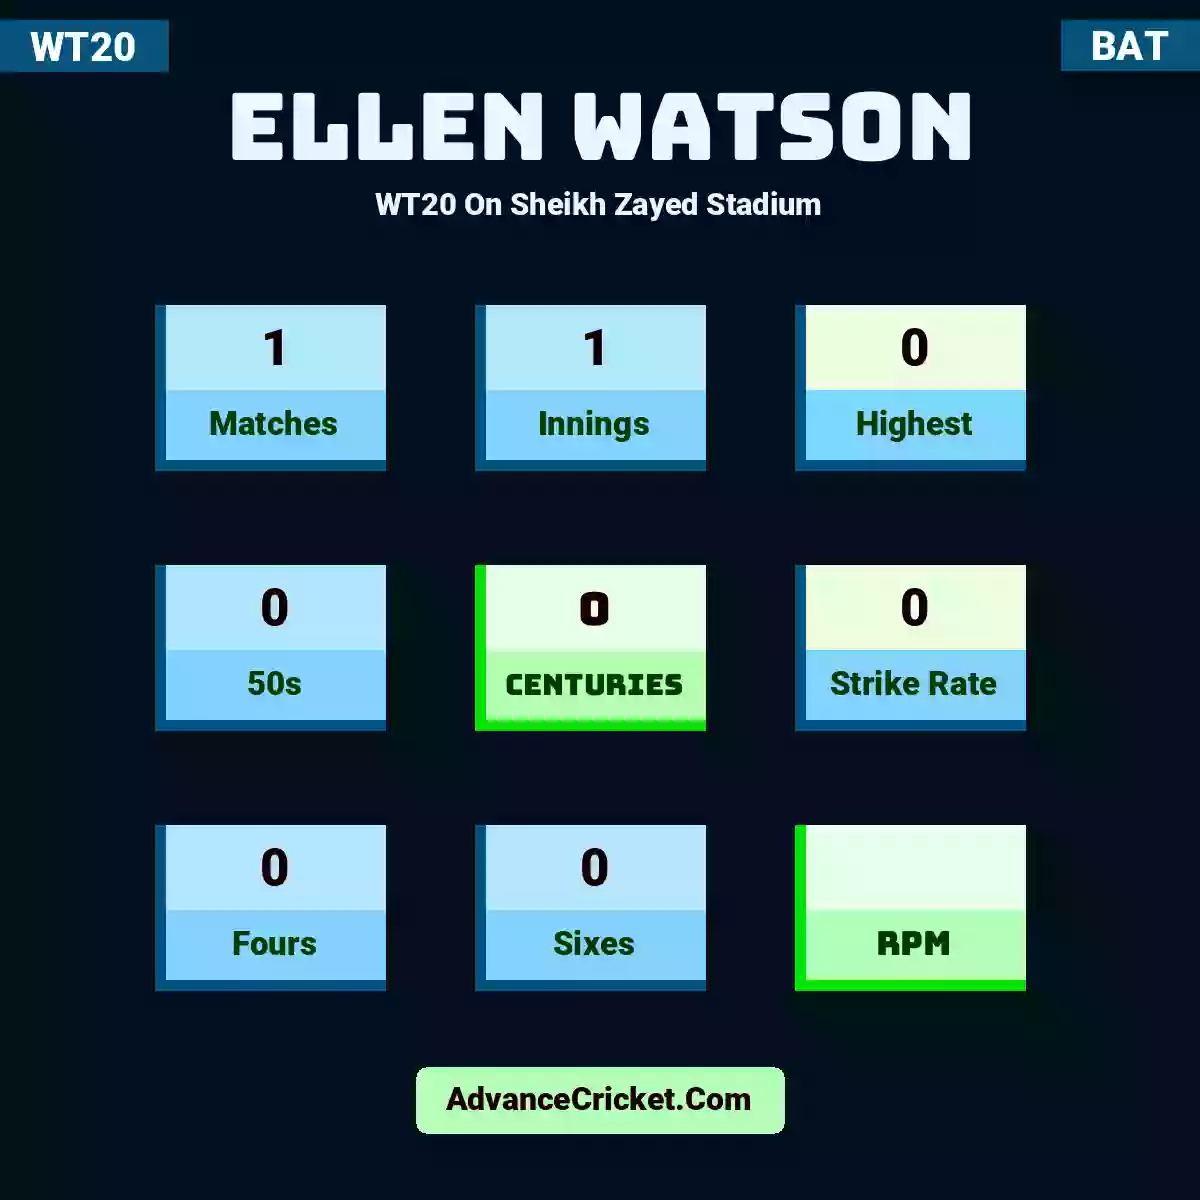 Ellen Watson WT20  On Sheikh Zayed Stadium, Ellen Watson played 1 matches, scored 0 runs as highest, 0 half-centuries, and 0 centuries, with a strike rate of 0. E.Watson hit 0 fours and 0 sixes.